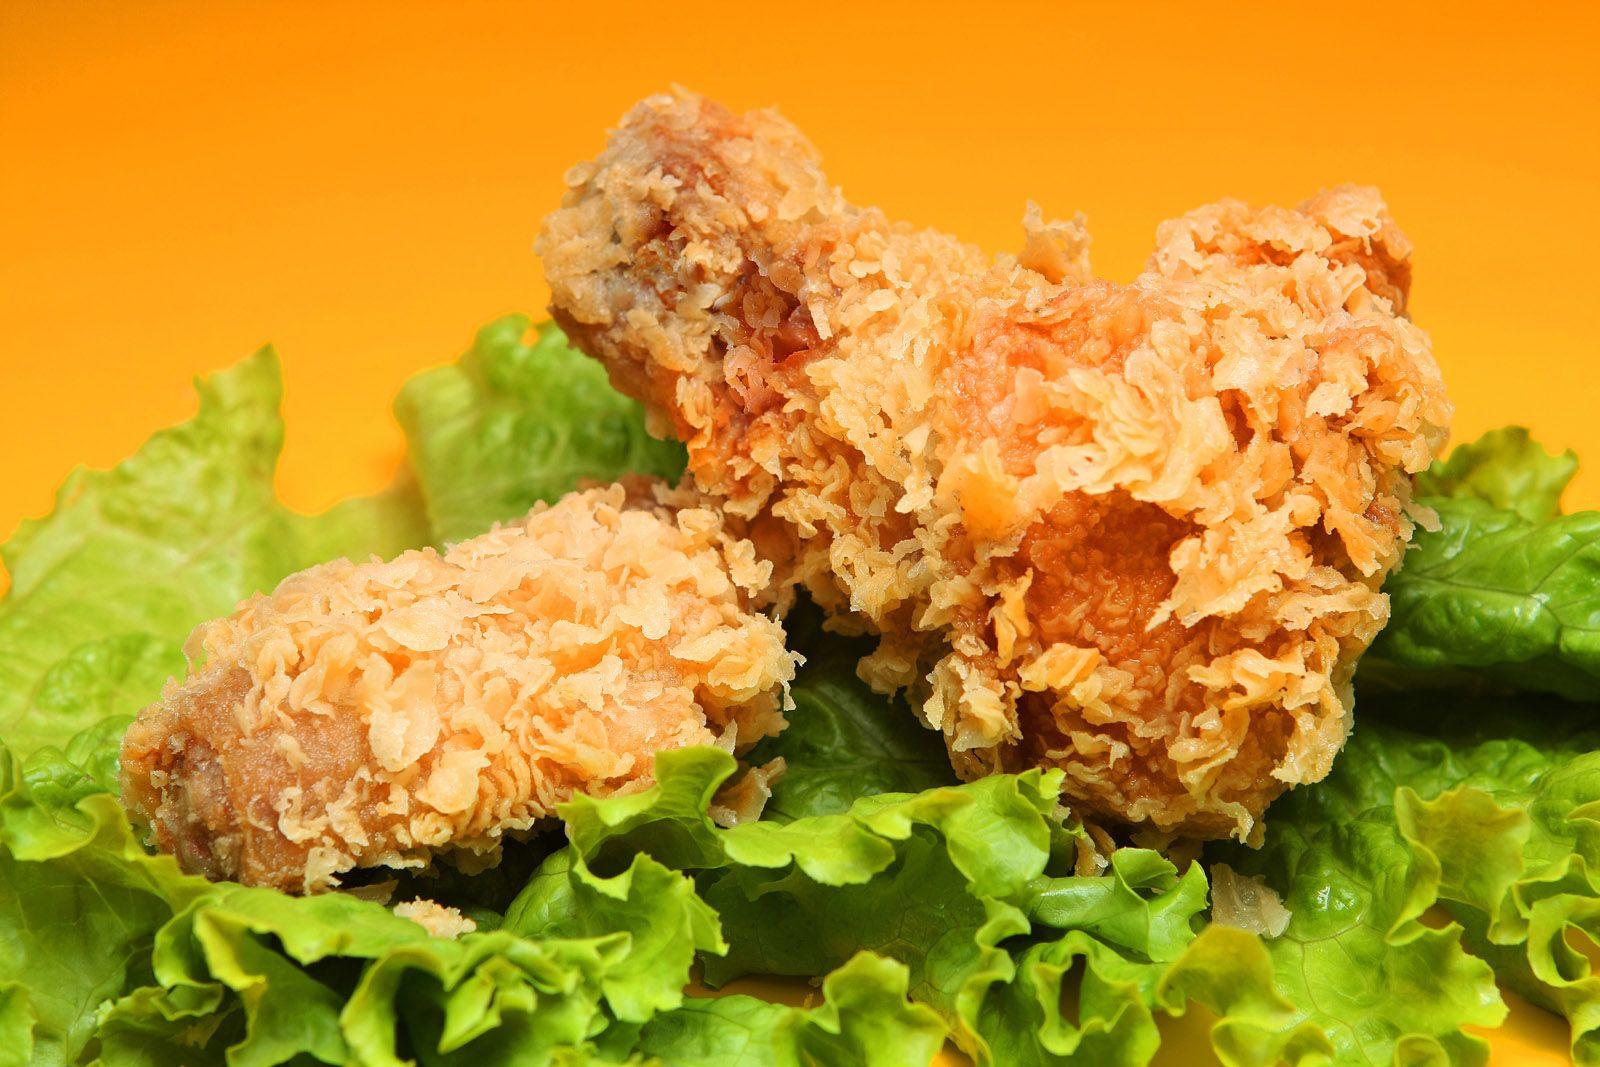 Fried Chicken HD Wallpapers - Top Free Fried Chicken HD Backgrounds